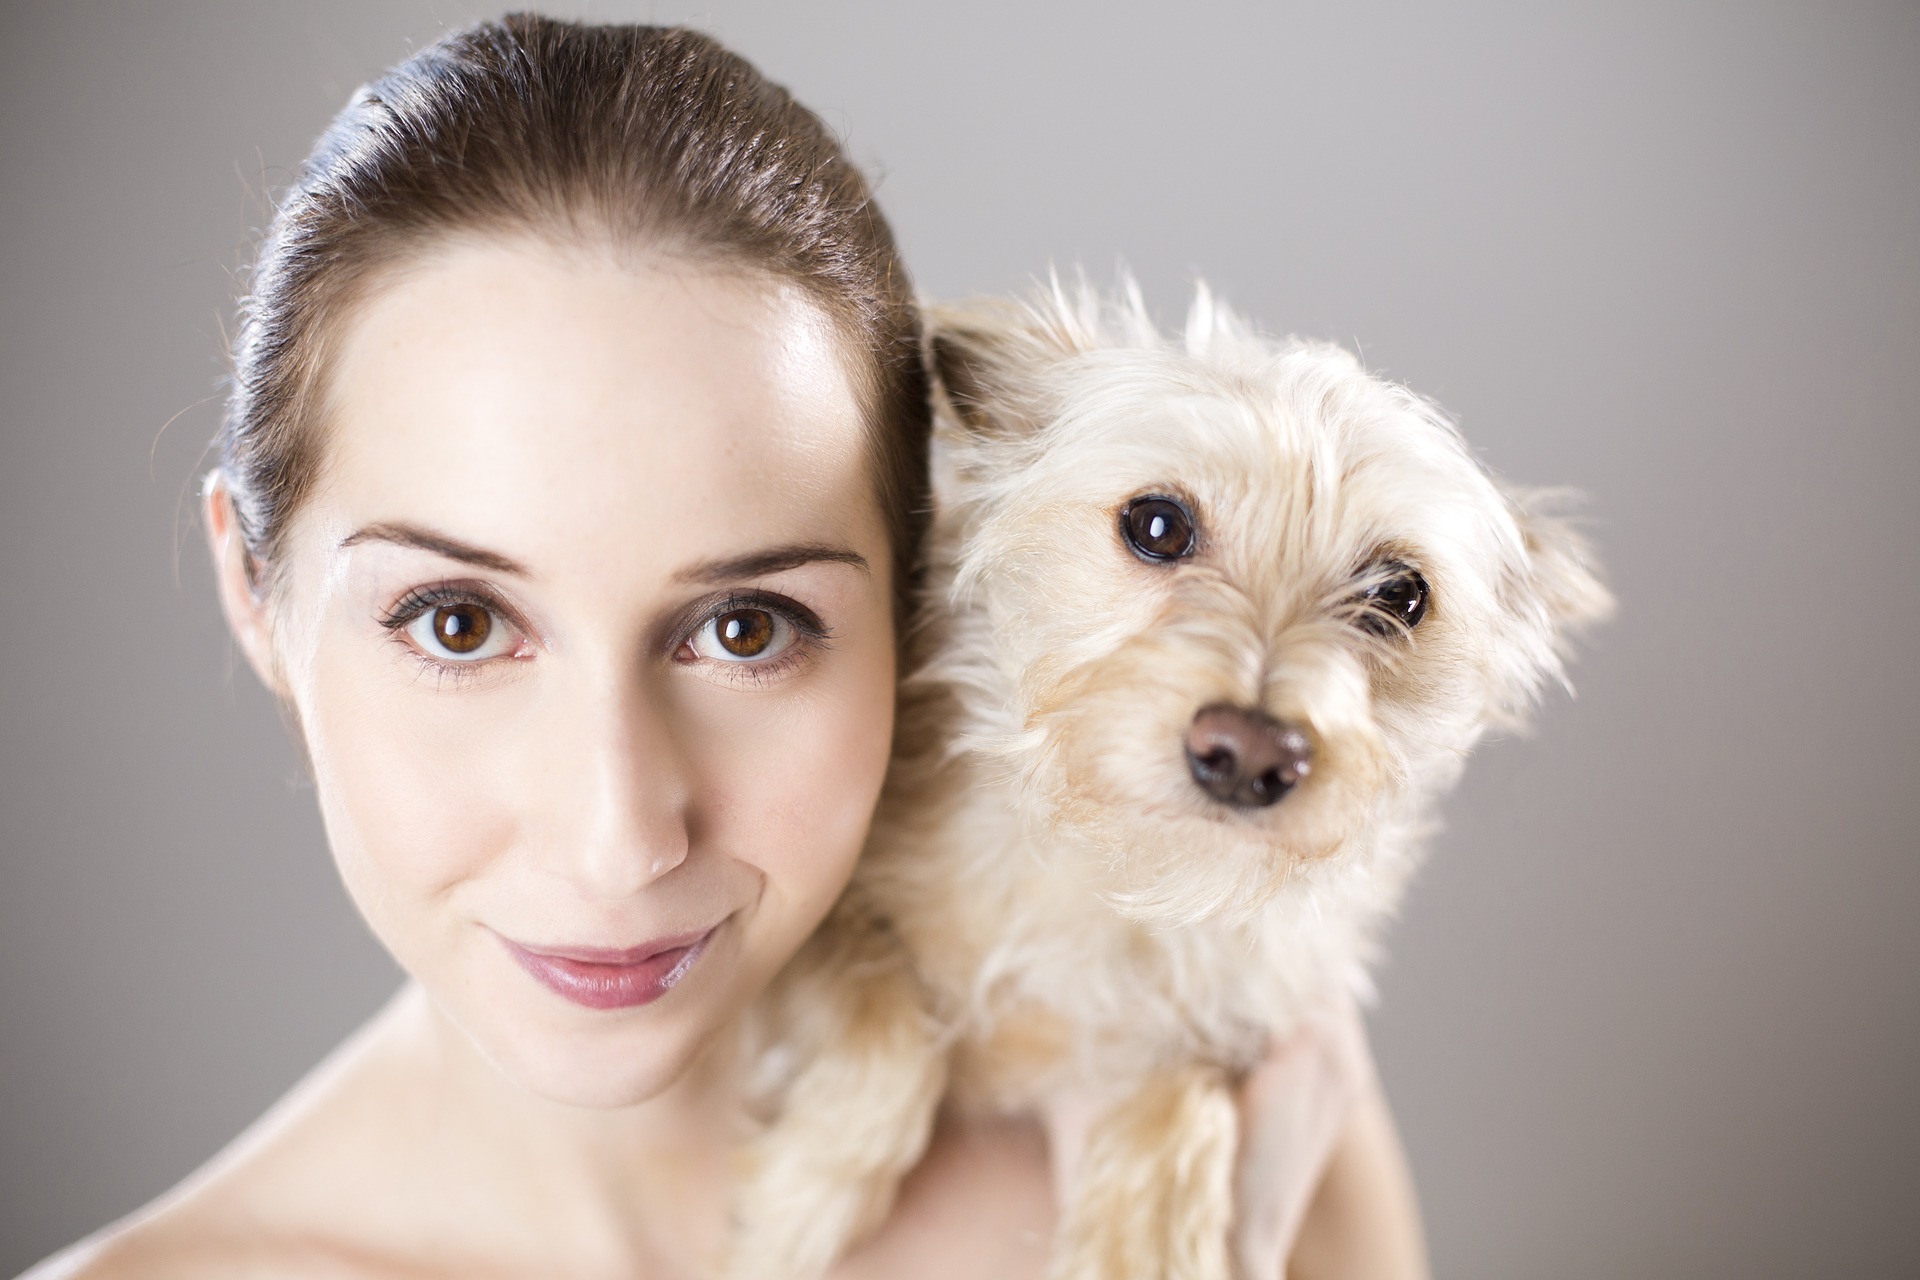 Health benefits to owning a dog